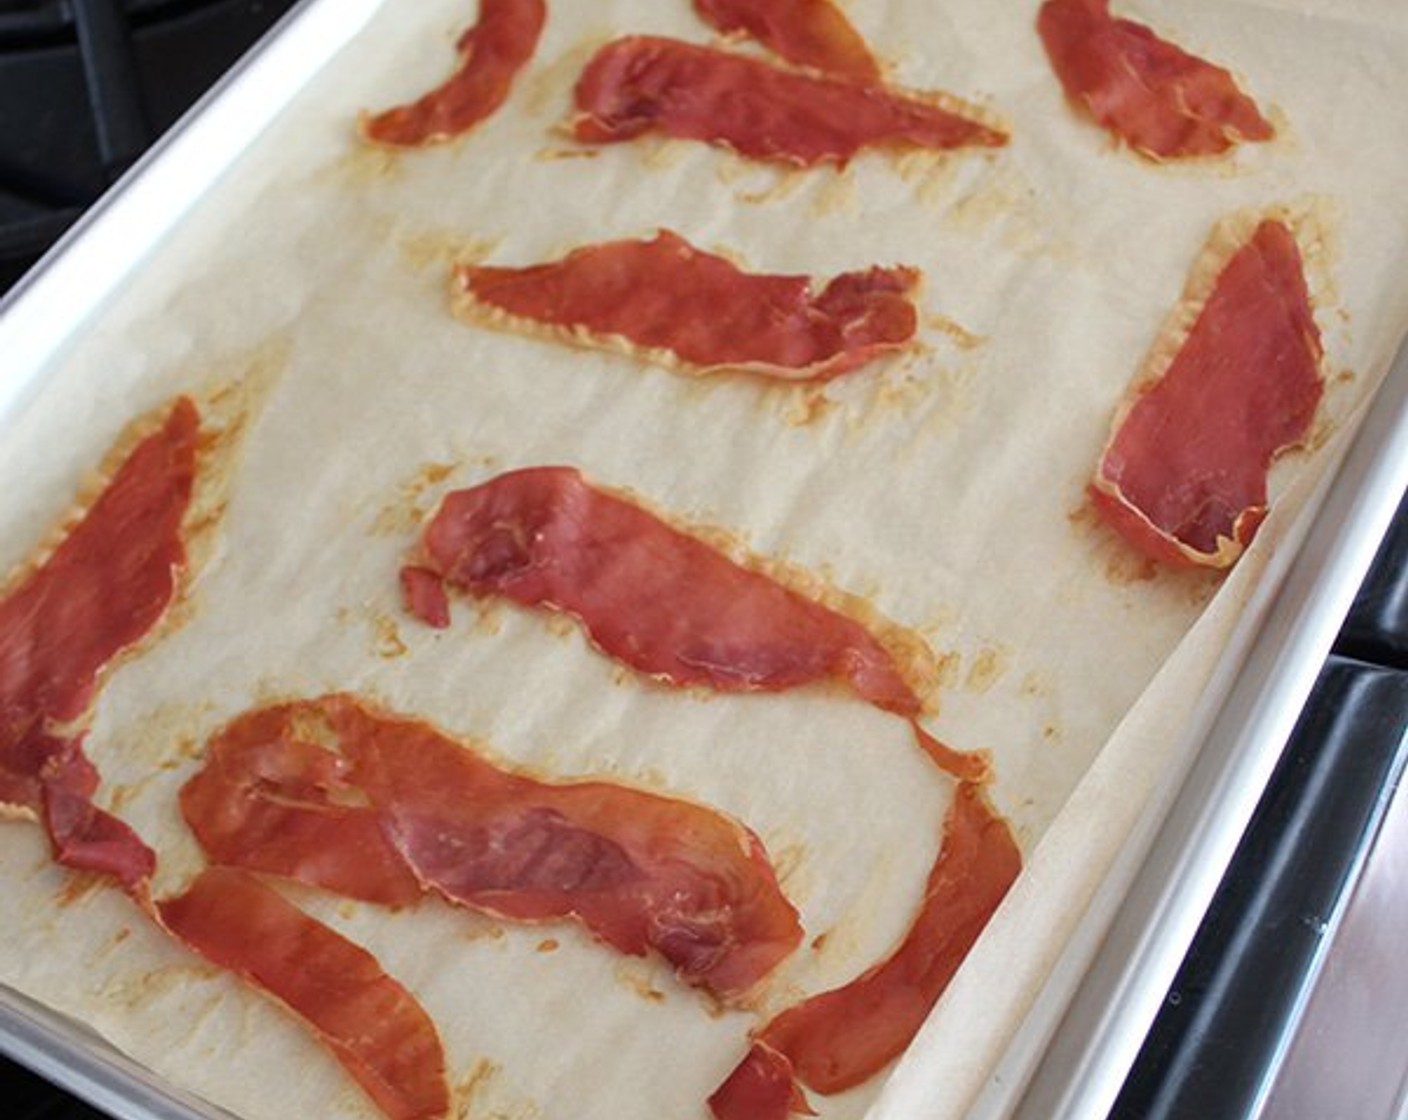 step 2 Lay the slices of Prosciutto (2 oz) in a single layer on the pan and roast for 8-10 minutes, until browned. Set aside to cool, then break into small pieces.